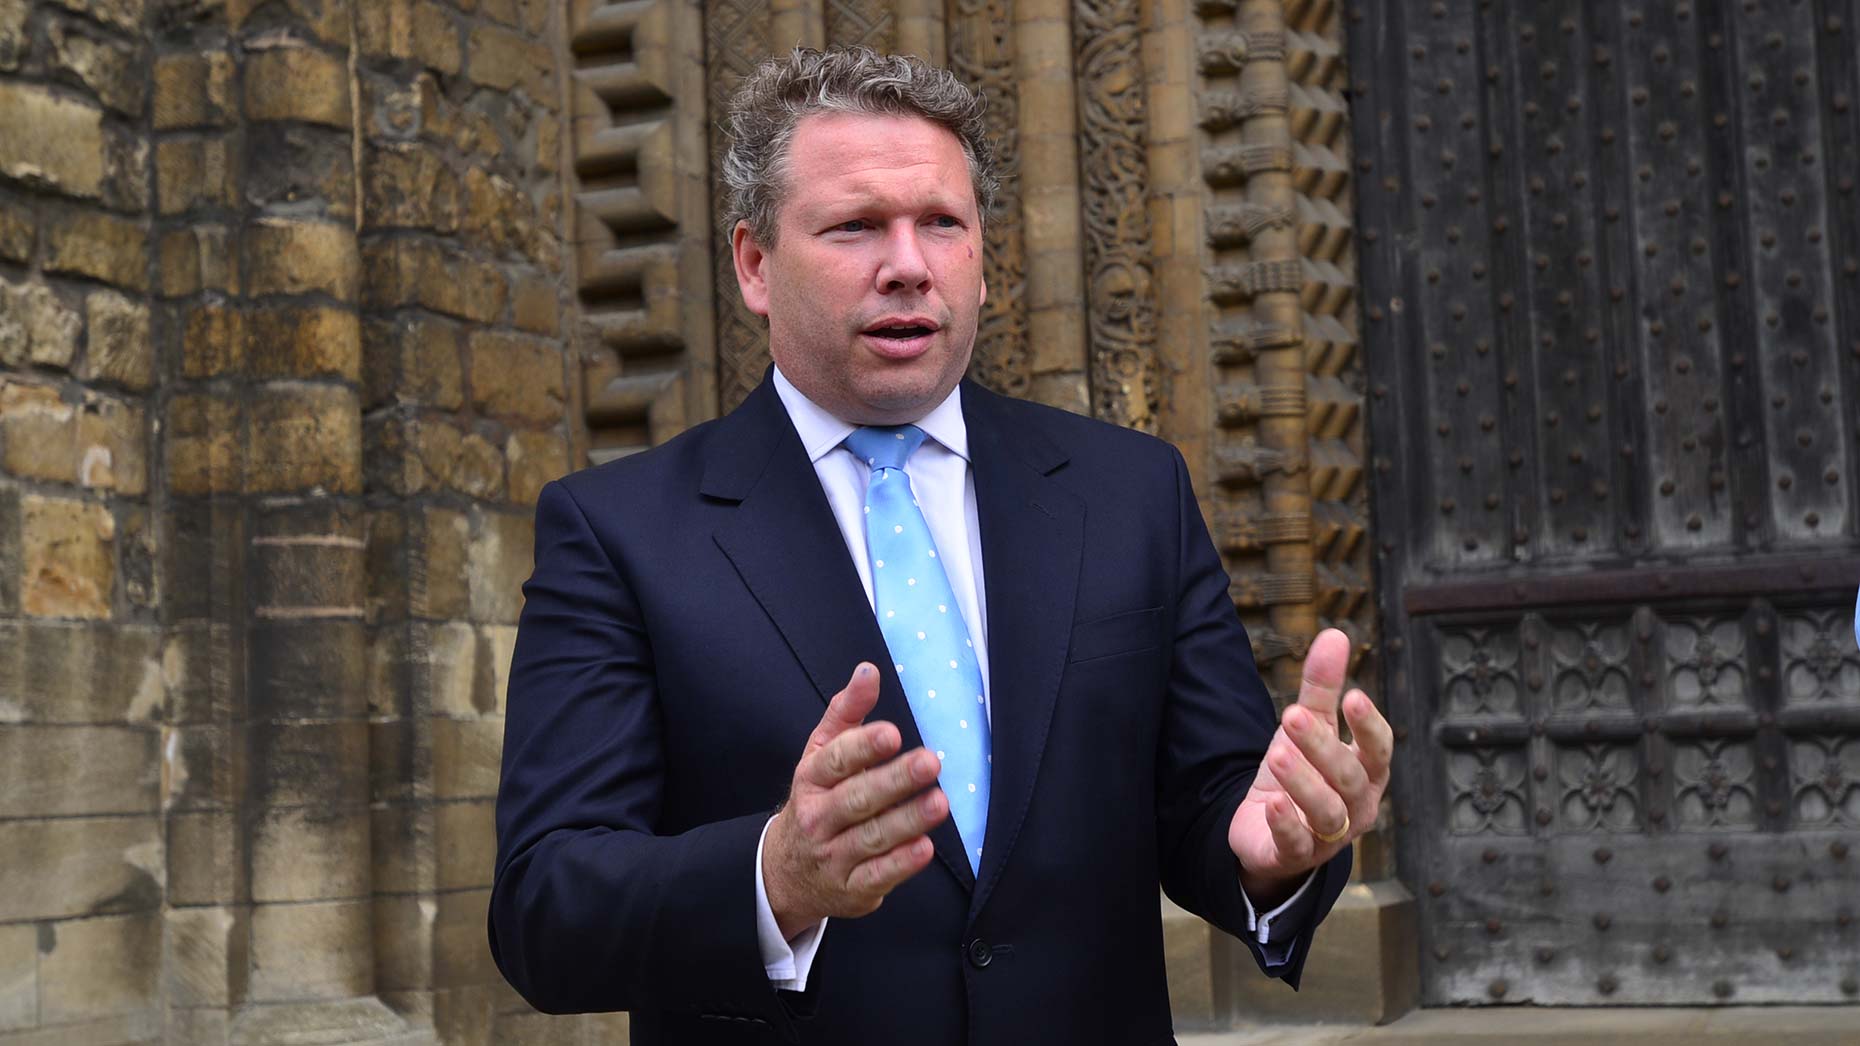 Lincoln MP Karl McCartney at the presentation at Lincoln Cathedral. Photo: Steve Smailes for The Lincolnite